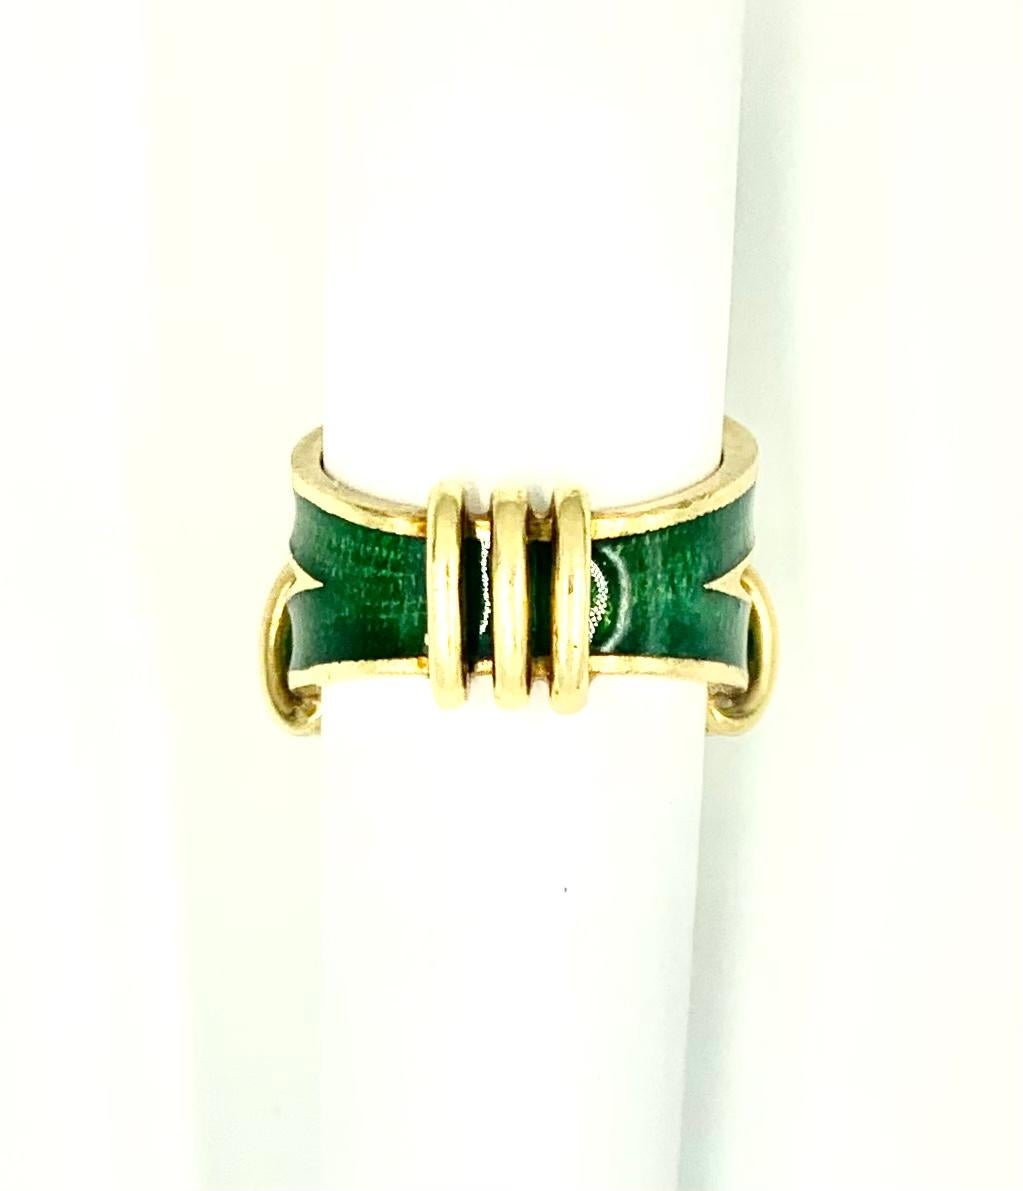 Rare Tiffany & Co. Schlumberger 18K Yellow Gold Emerald Enamel Tiered Knot Ring 1